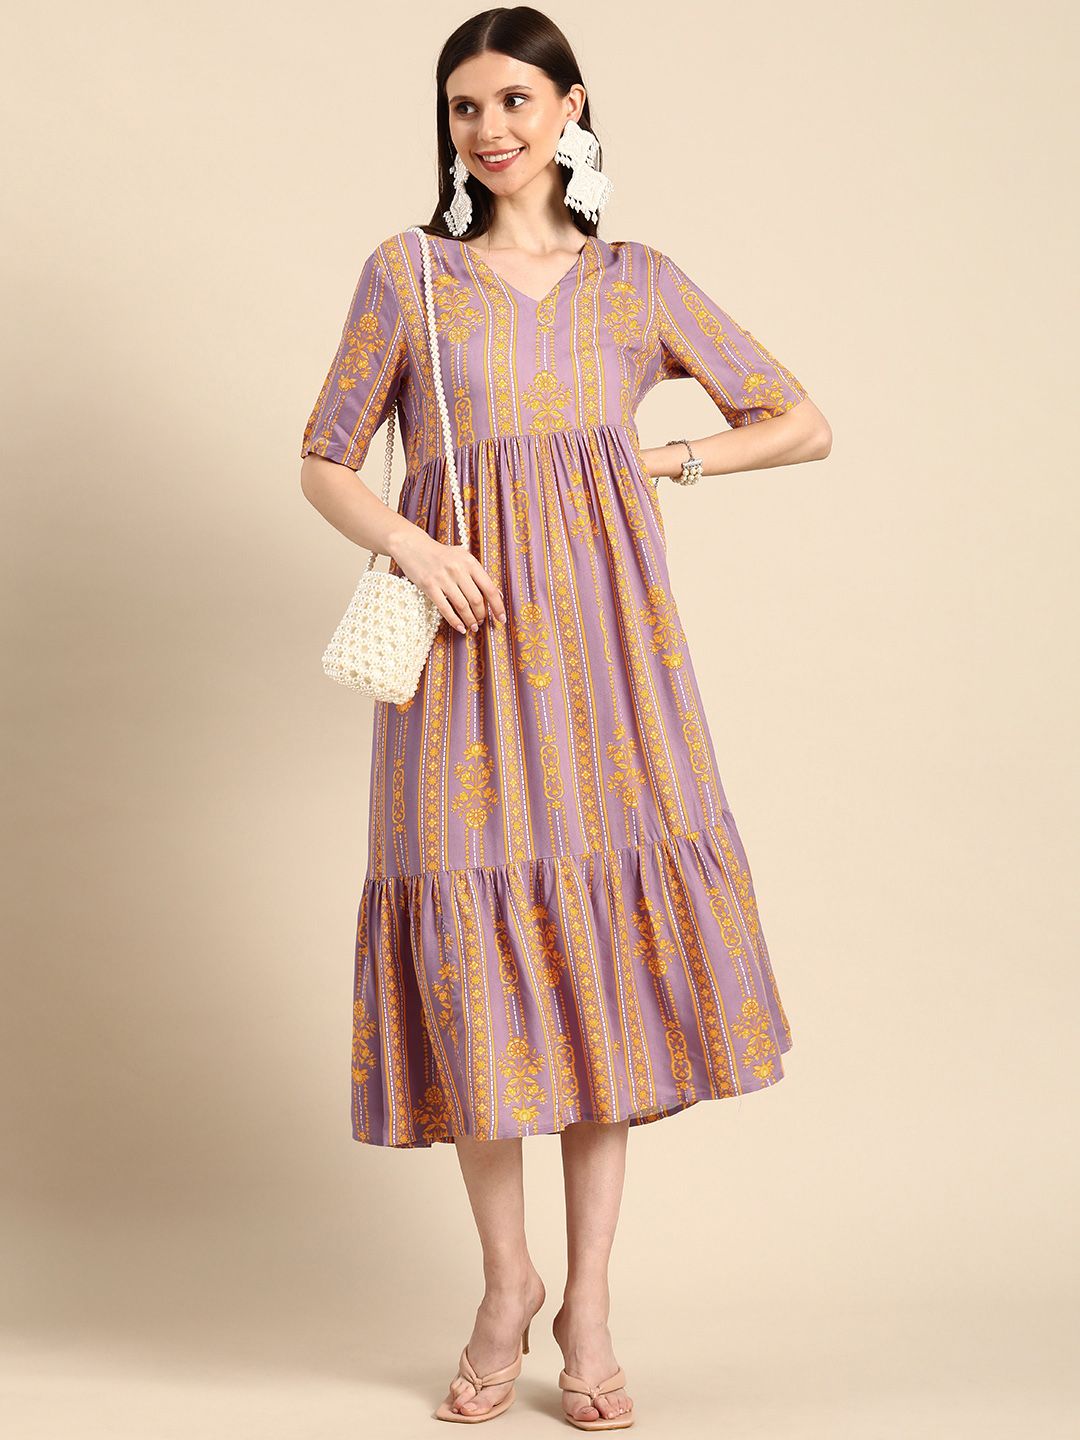 Anouk Mauve & Yellow Ethnic Motifs Tie-Up Neck A-Line Maxi Dress Price in India